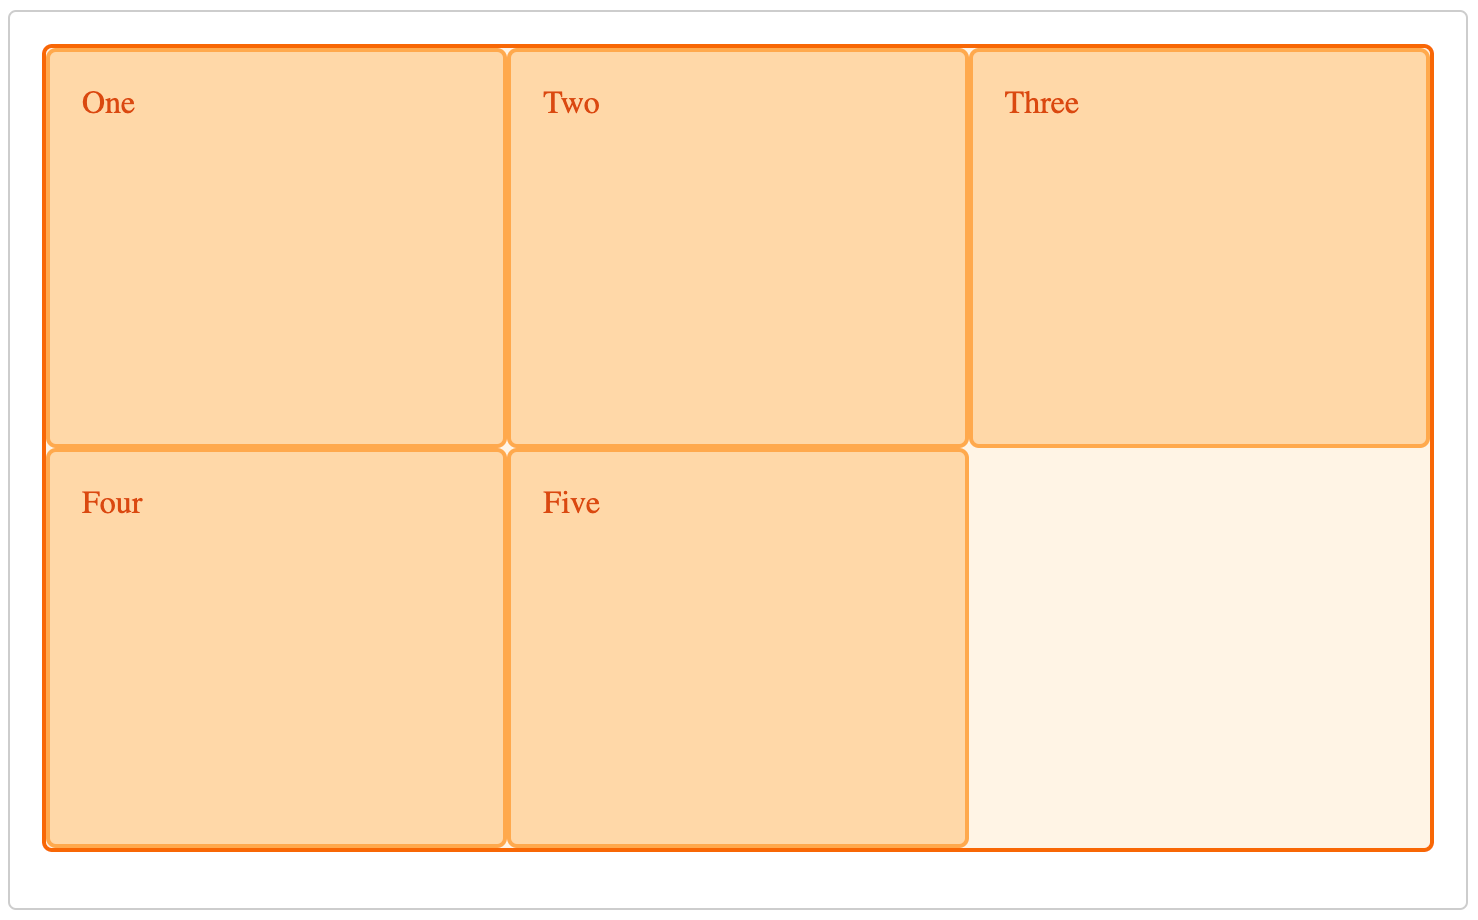 Illustration of a grid layout. There are five boxes with labelled with One to Five, read from left to right, top to bottom.